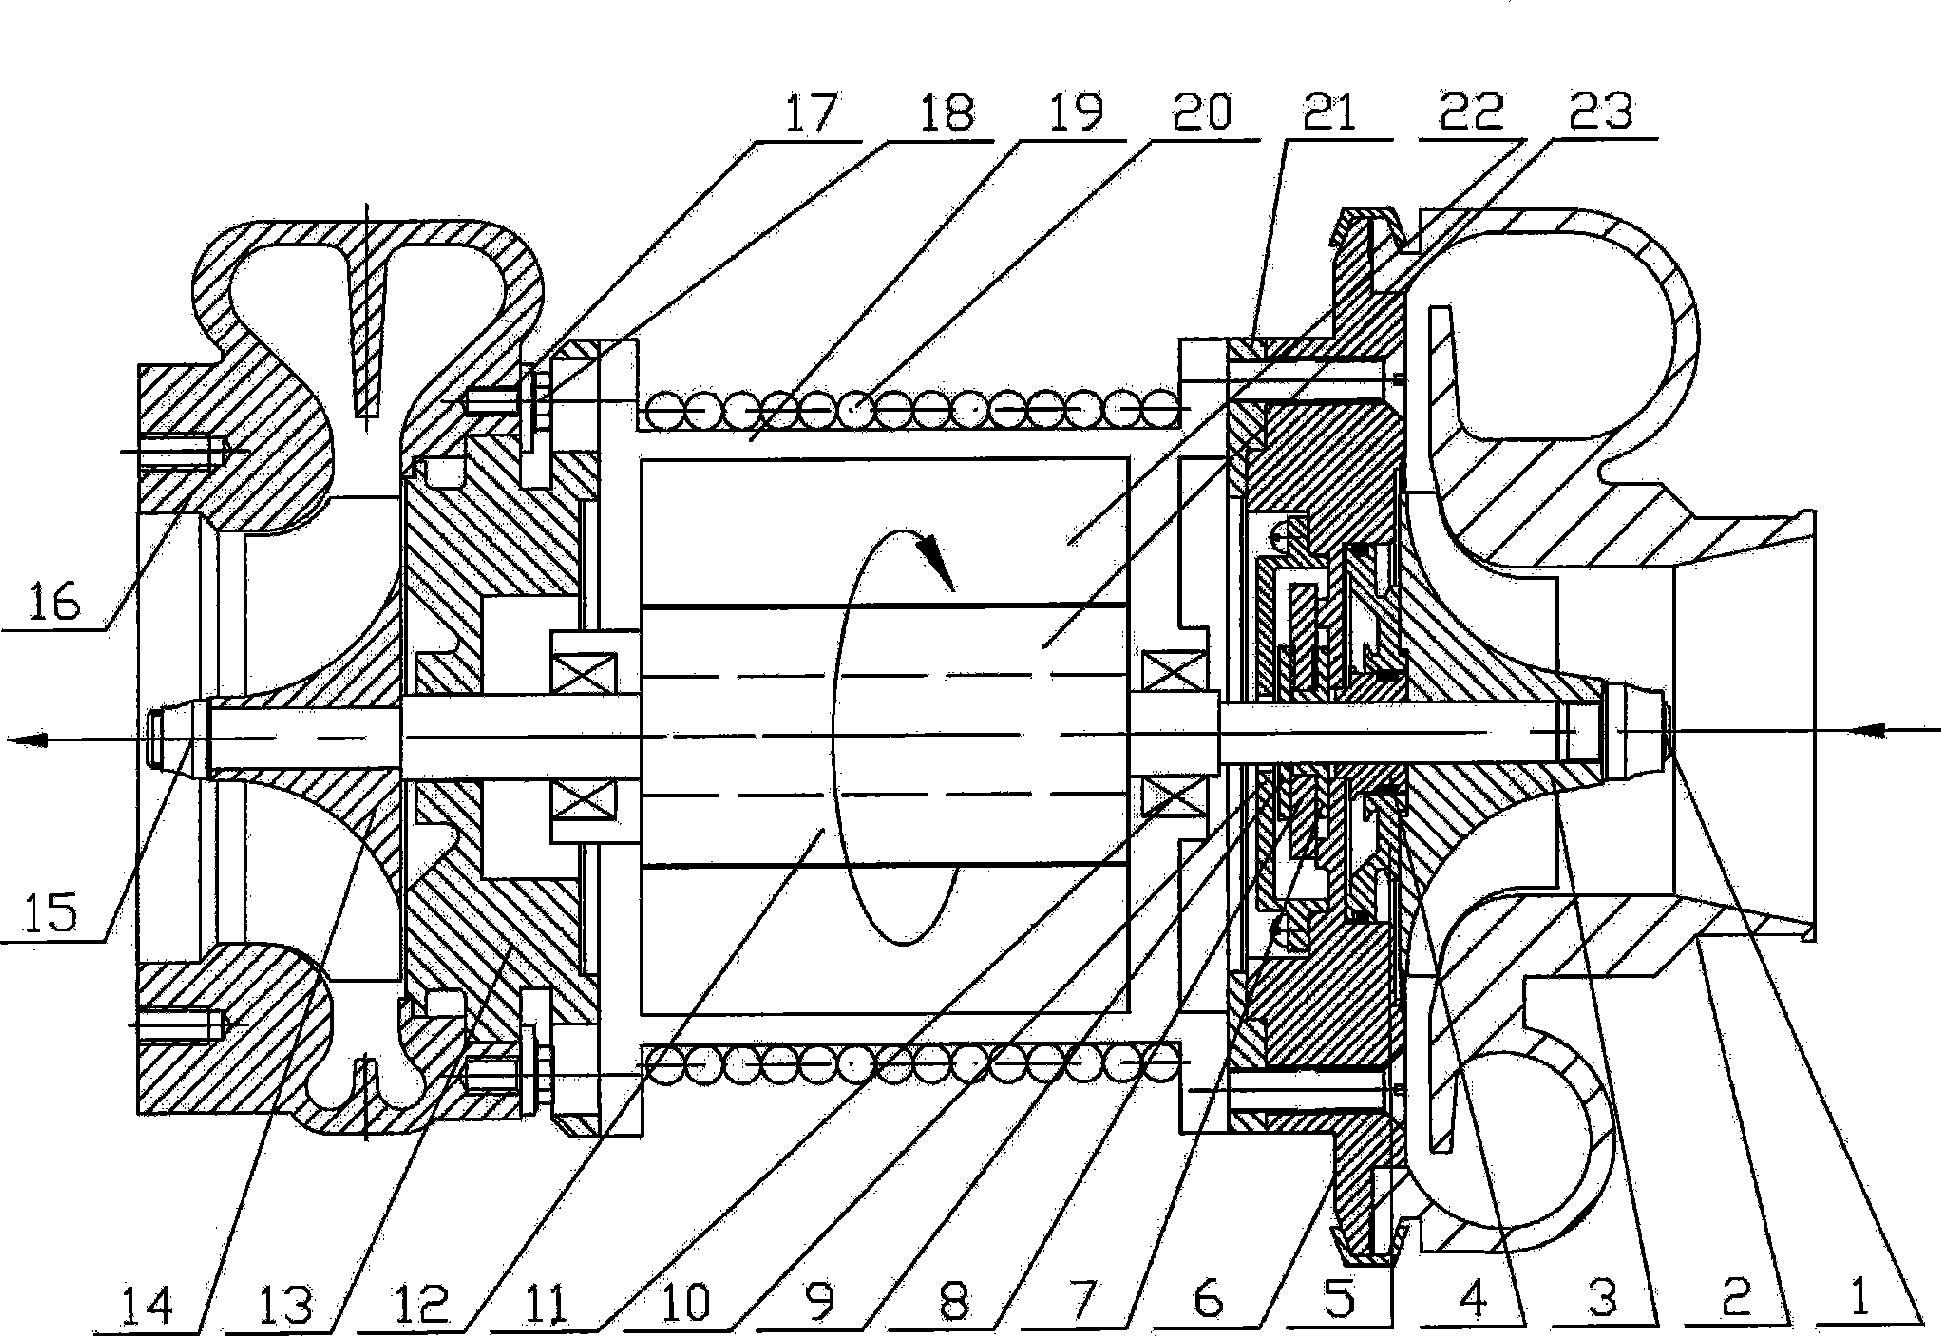 Fuel cell engine air turbine compressor with energy recovery